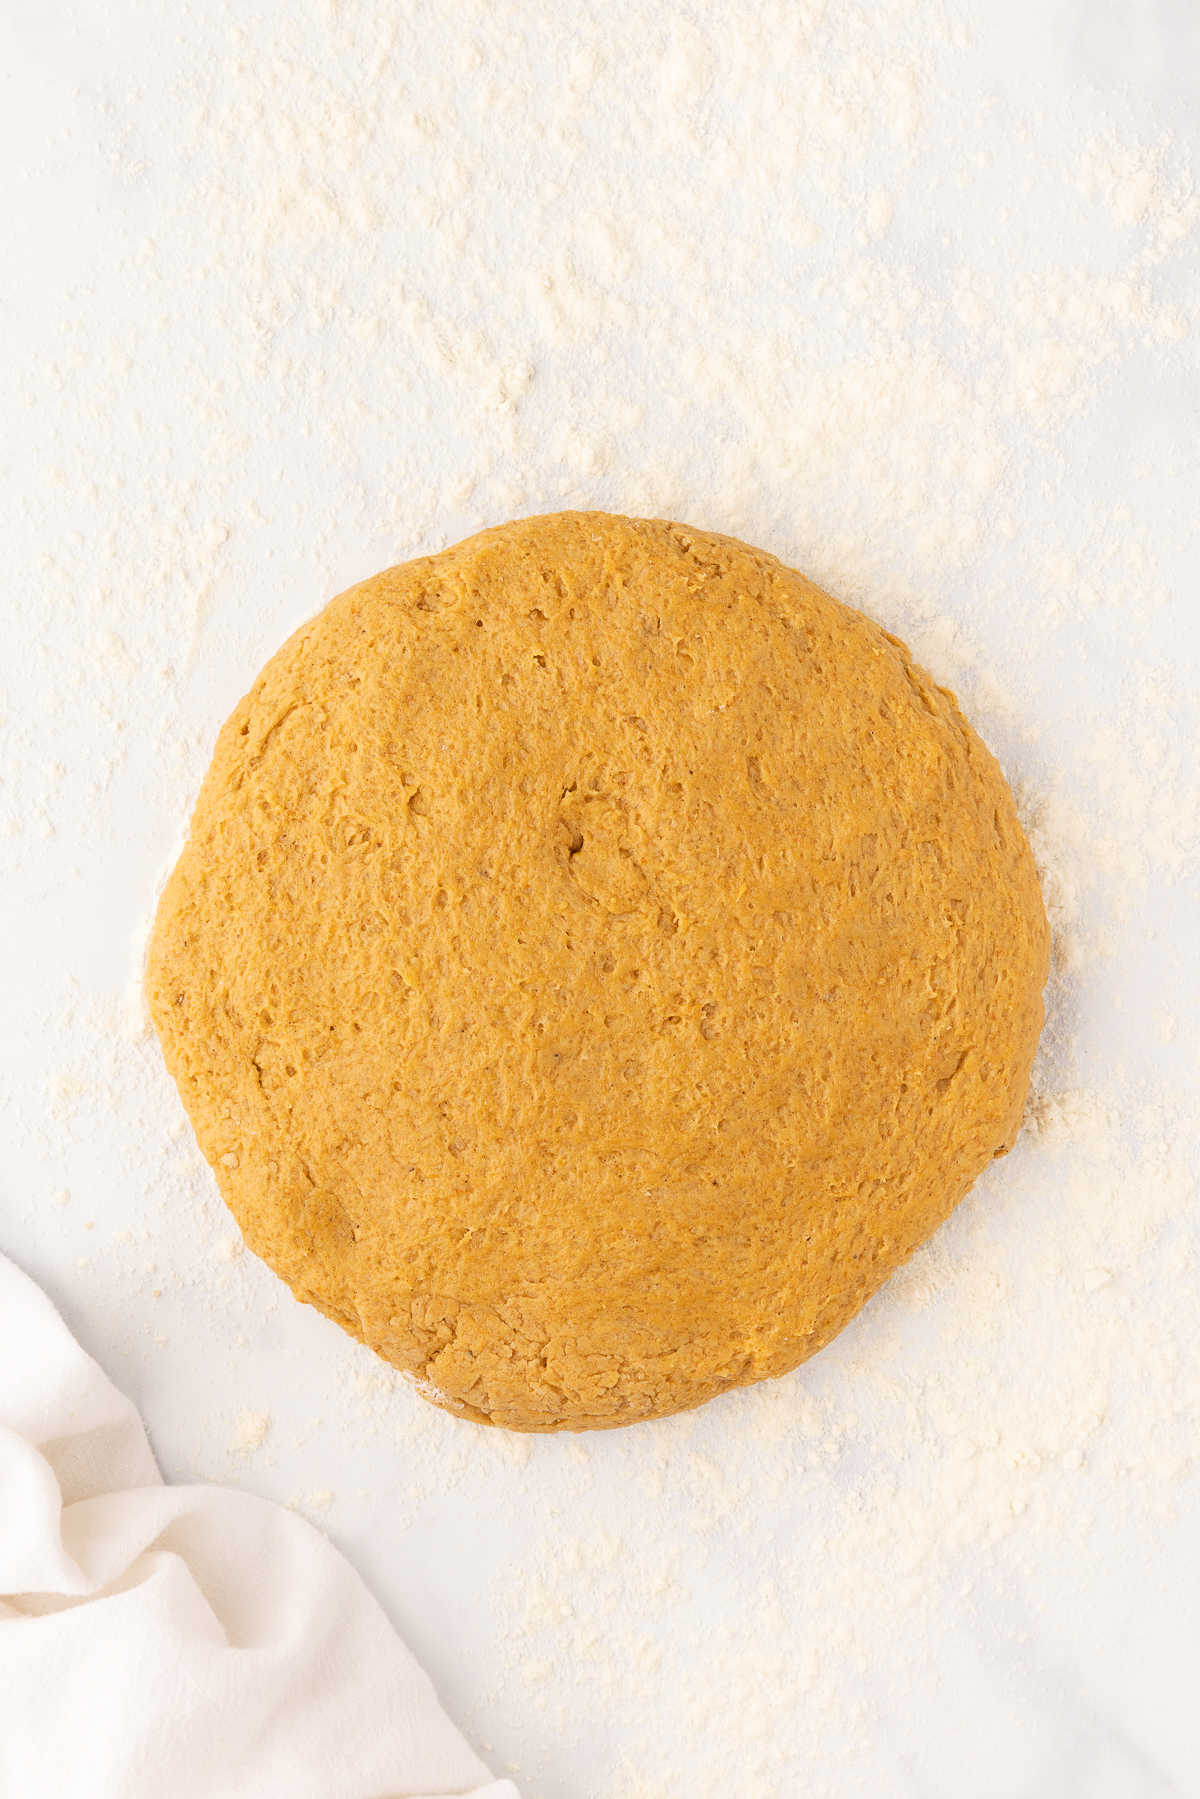 Pumpkin scone dough patted into a circle.